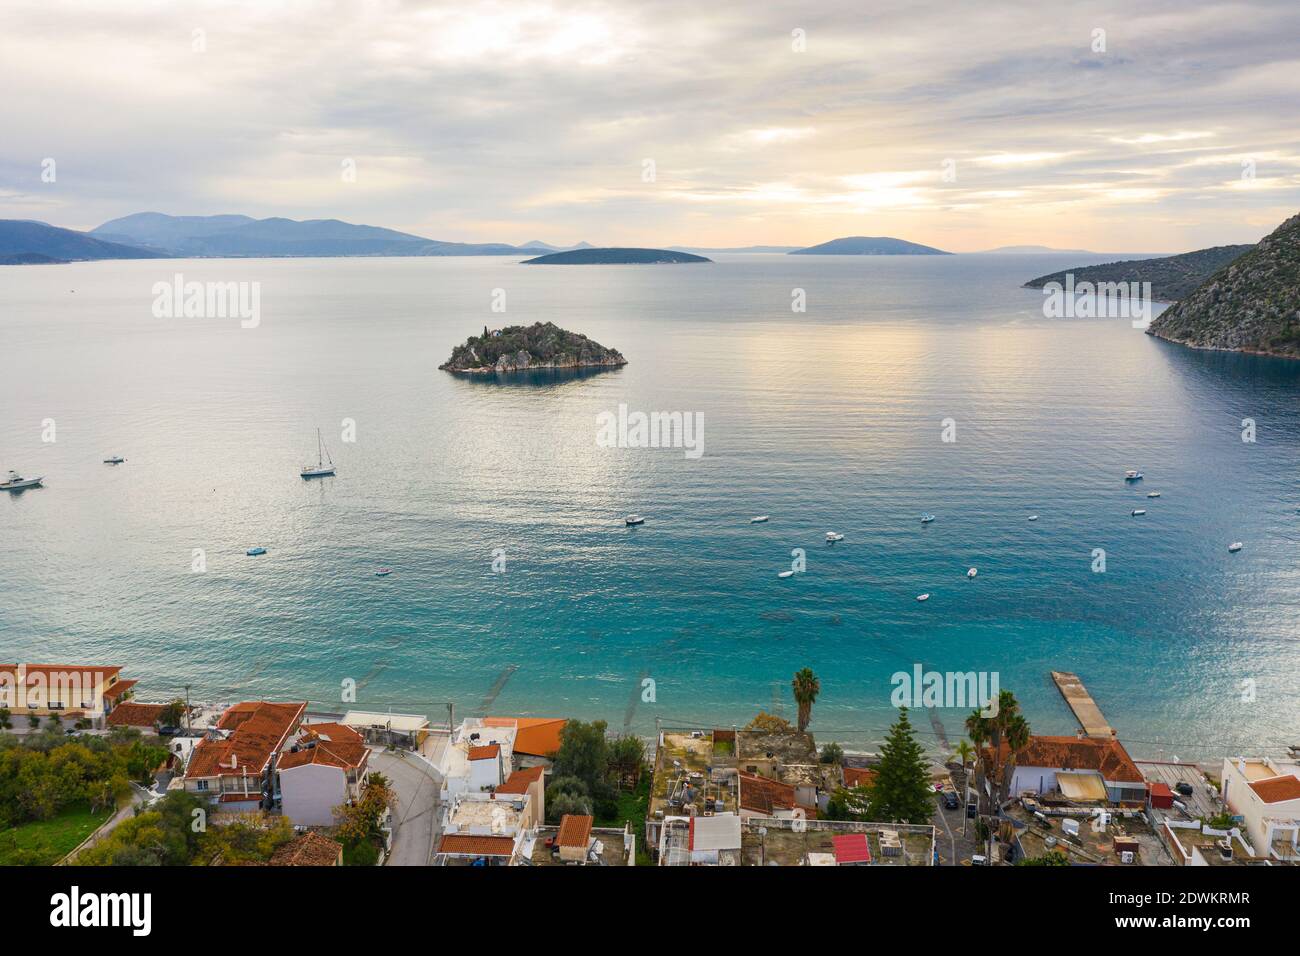 Aerial view of Tolo, Greece Stock Photo